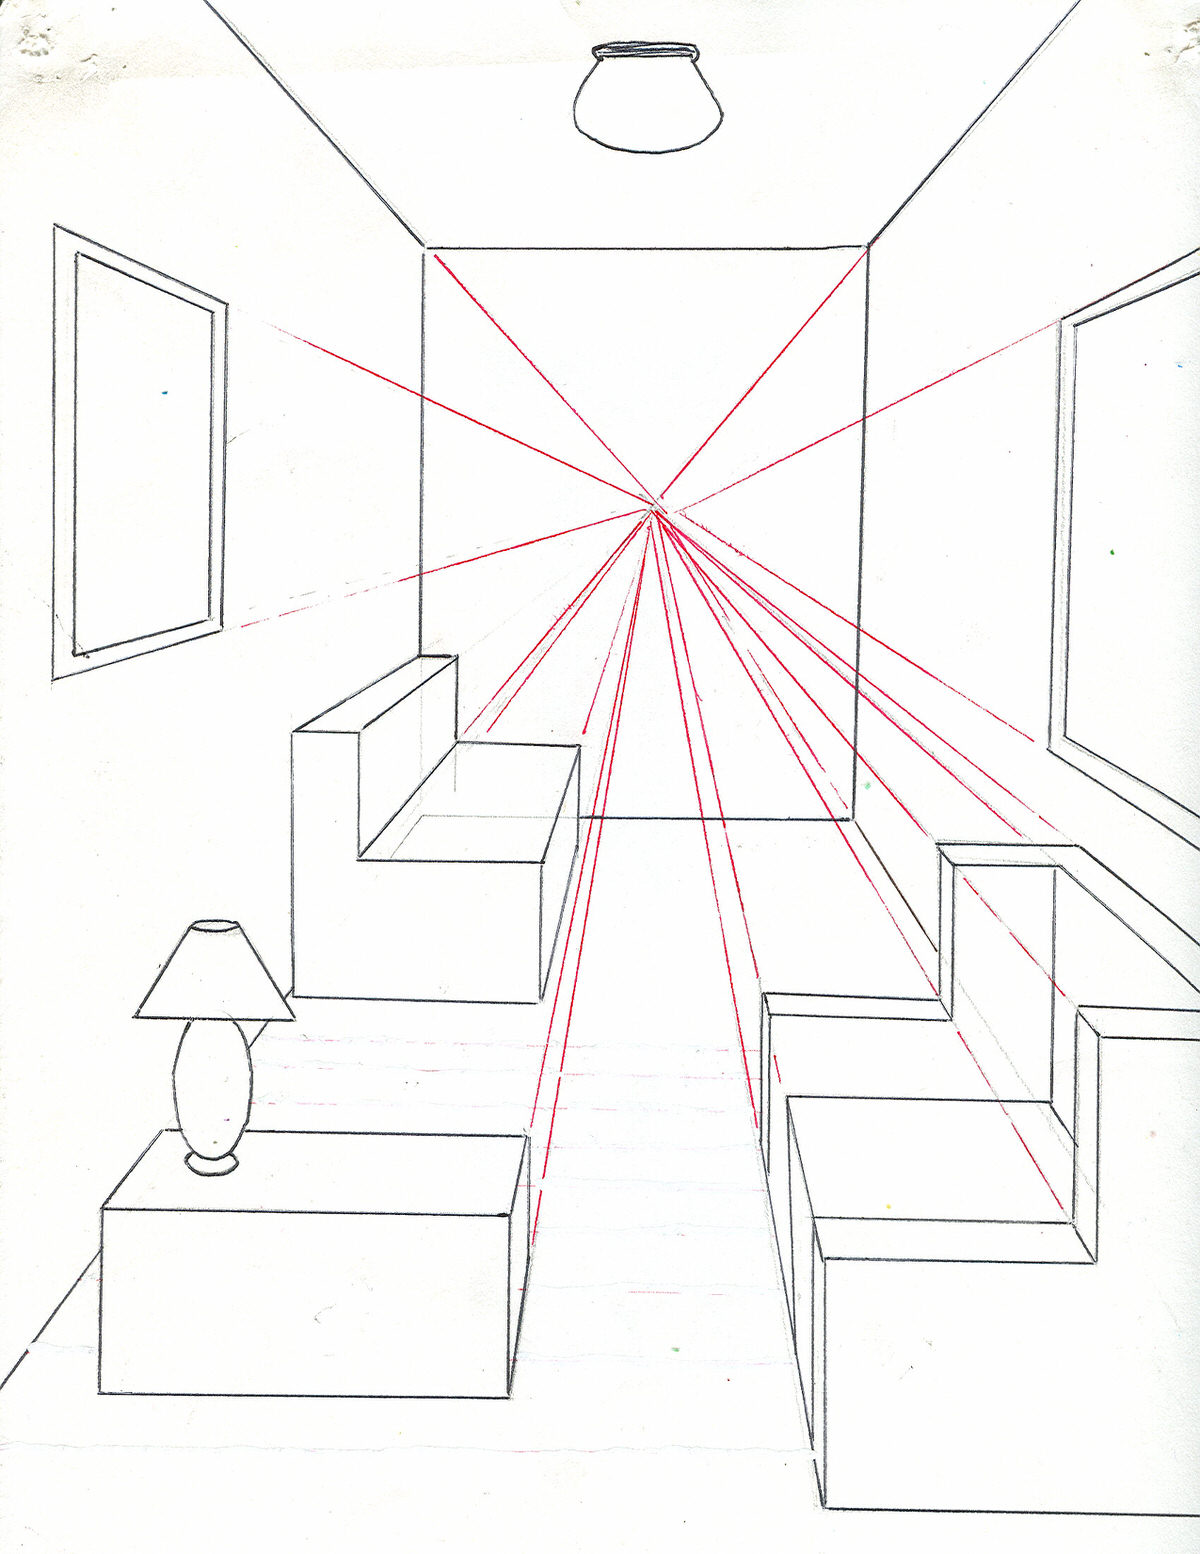 Single perspective drawing of a room.